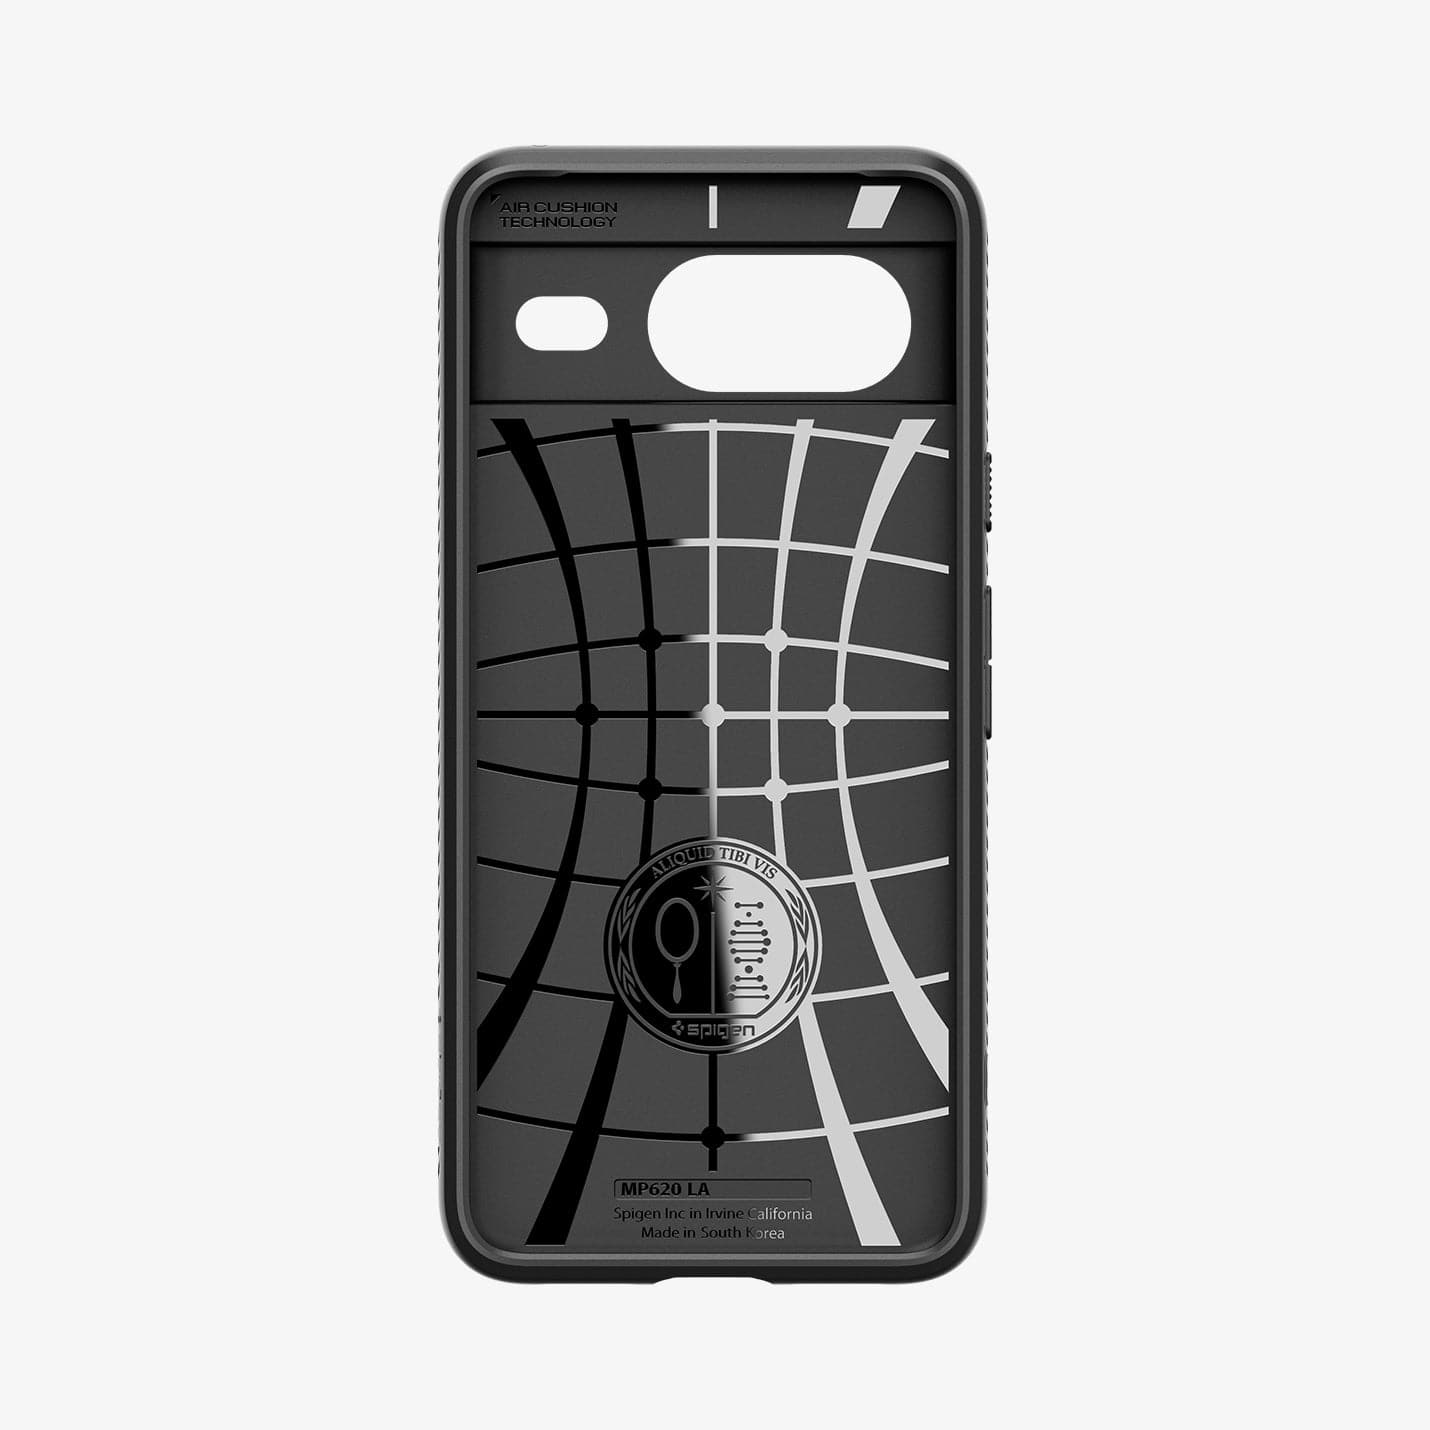 ACS06274 - Pixel 8 Case Liquid Air in Matte Black showing the inner case with spider web pattern